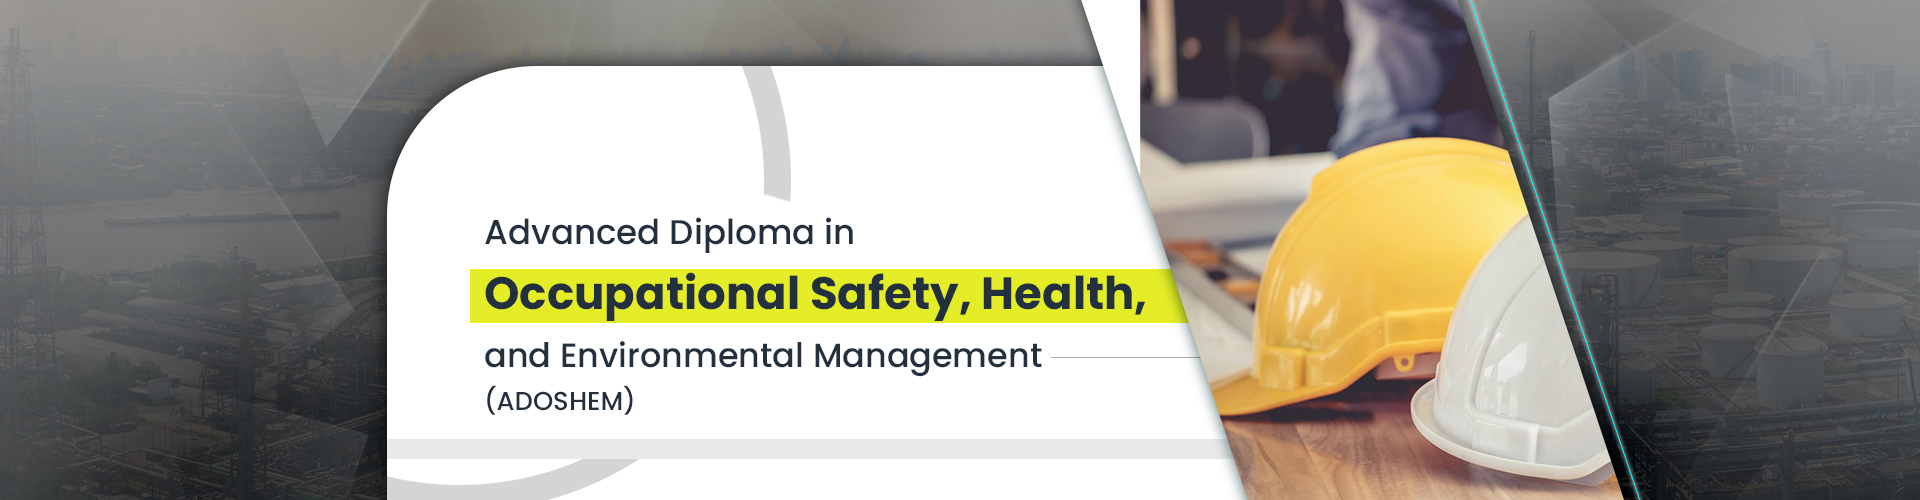 Advanced Diploma in Occupational Safety, Health, and Environmental Management (ADOSHEM)